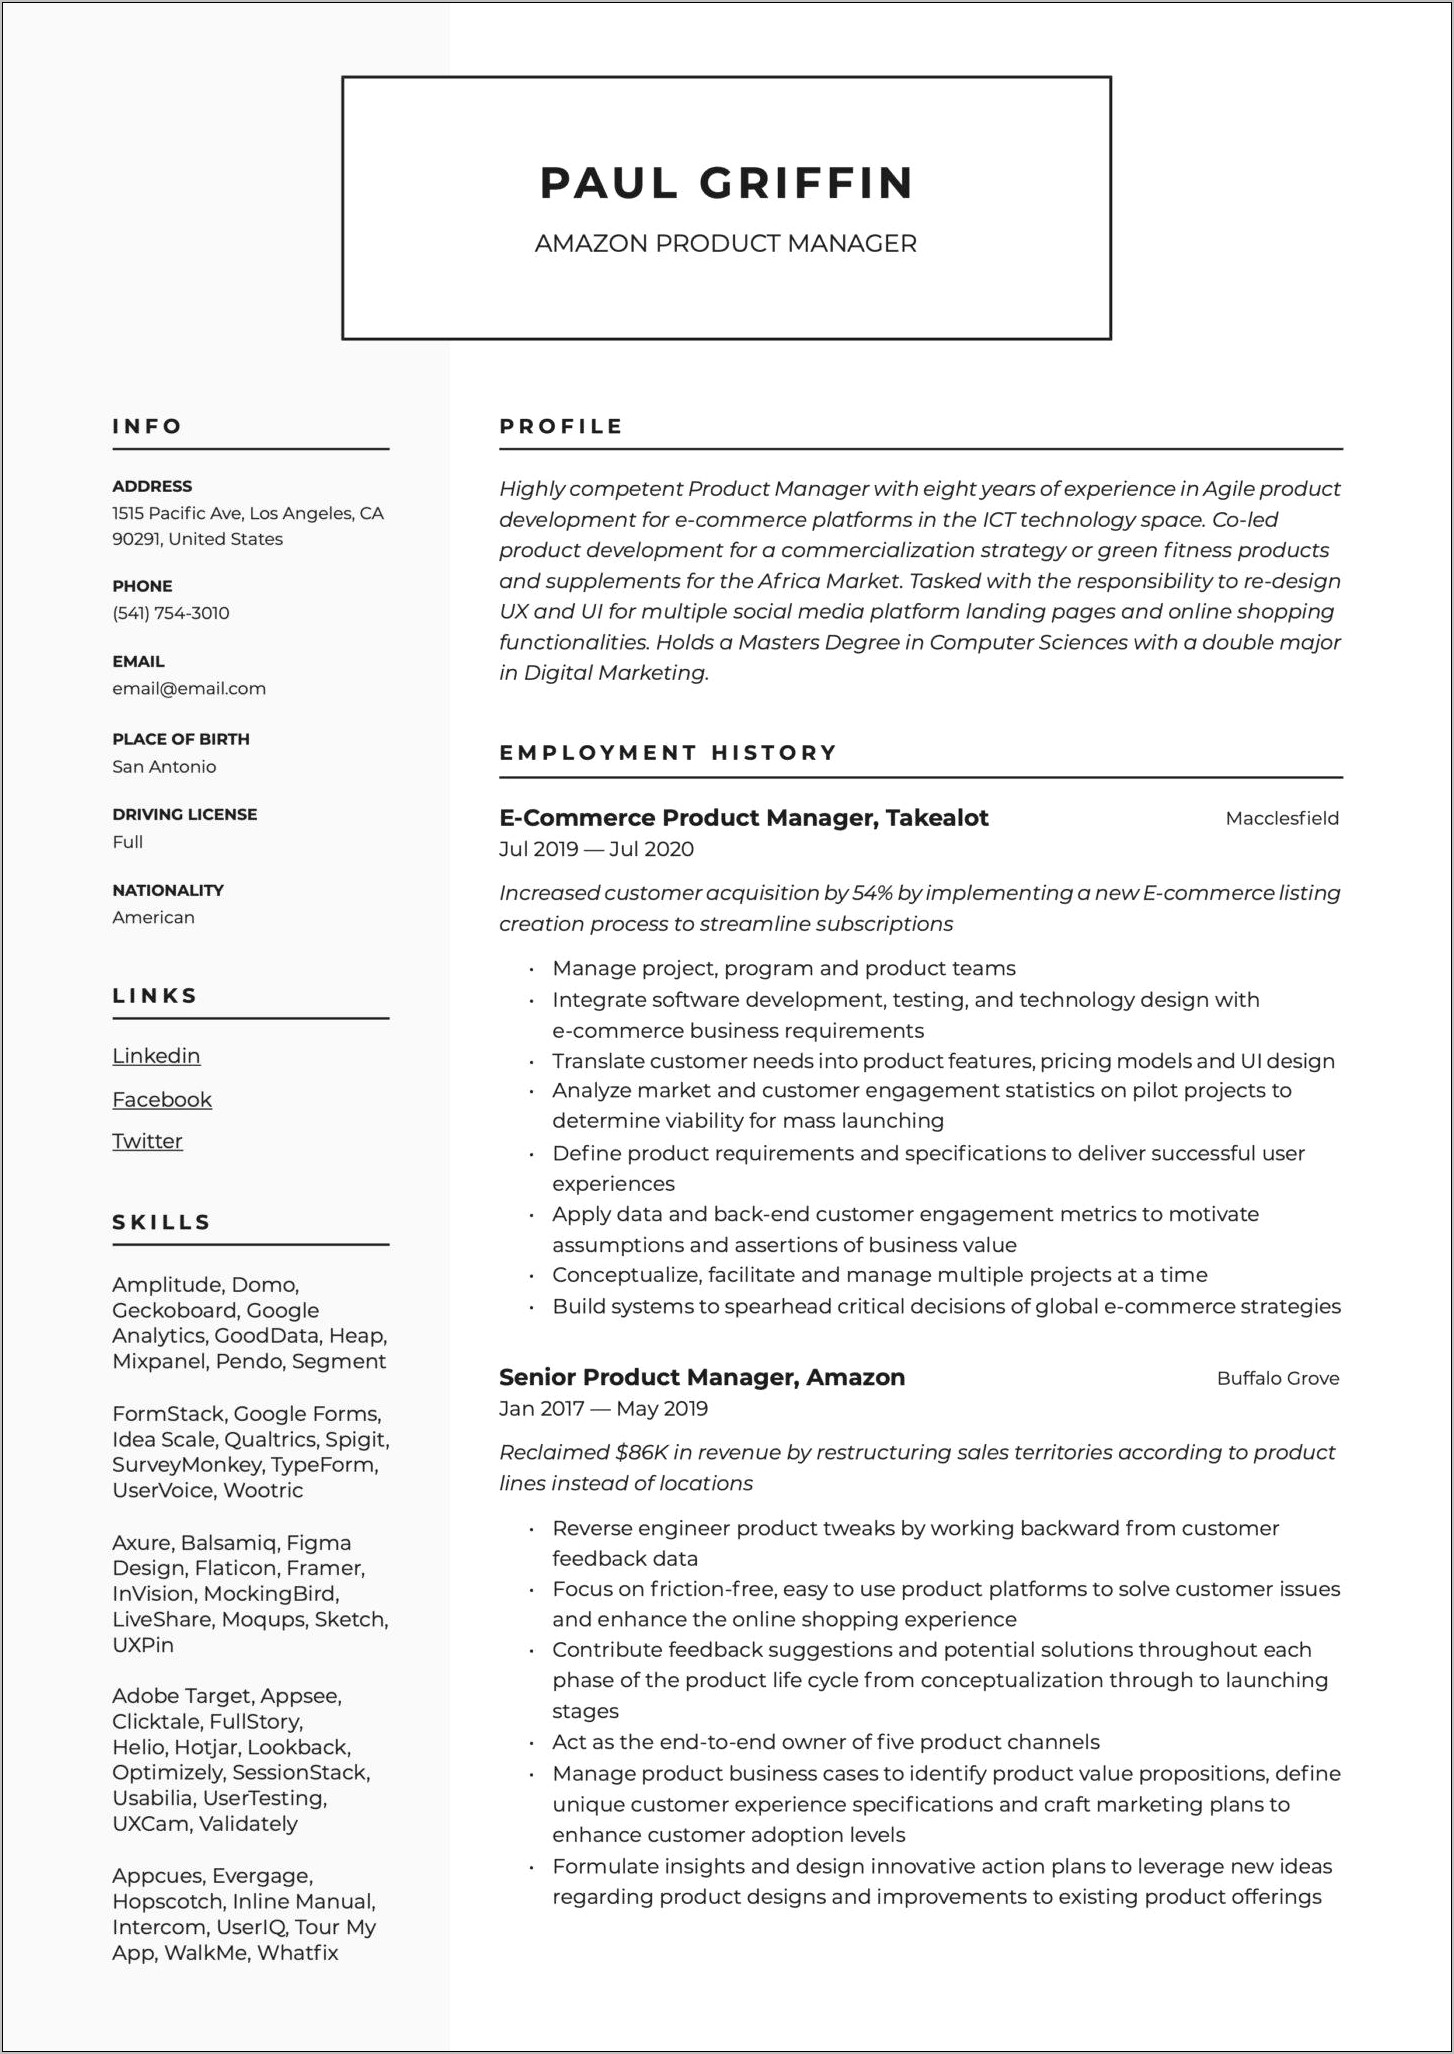 Resume Examples For Warehouse Associate For Amazon